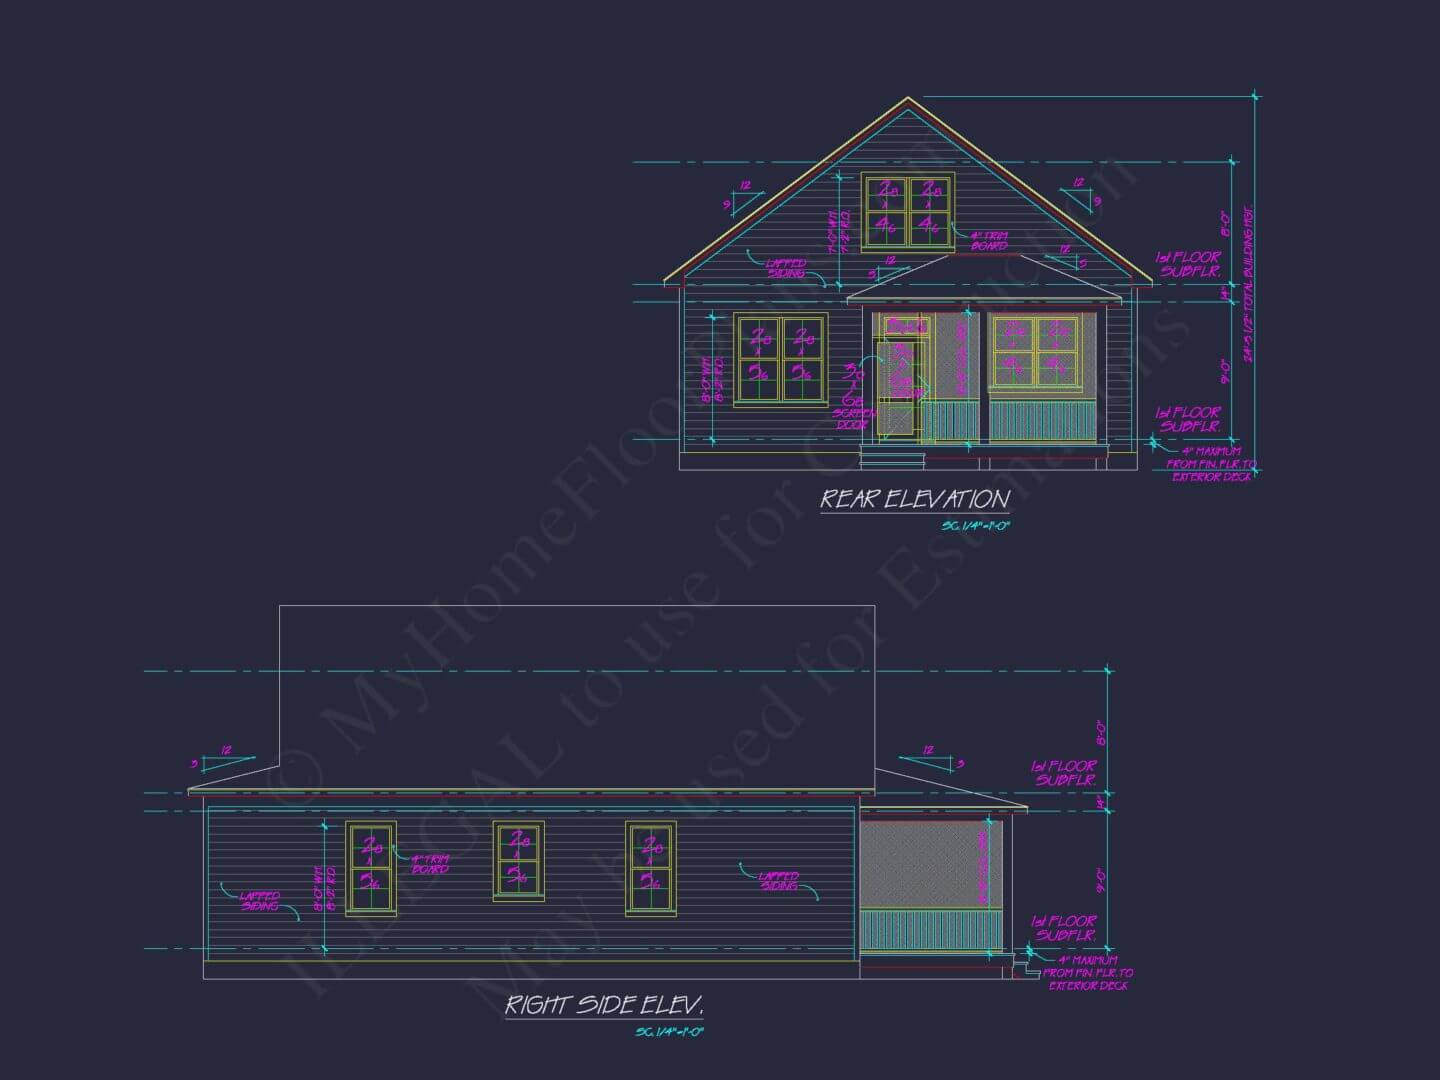 19-2238 my home floor plans_Page_08